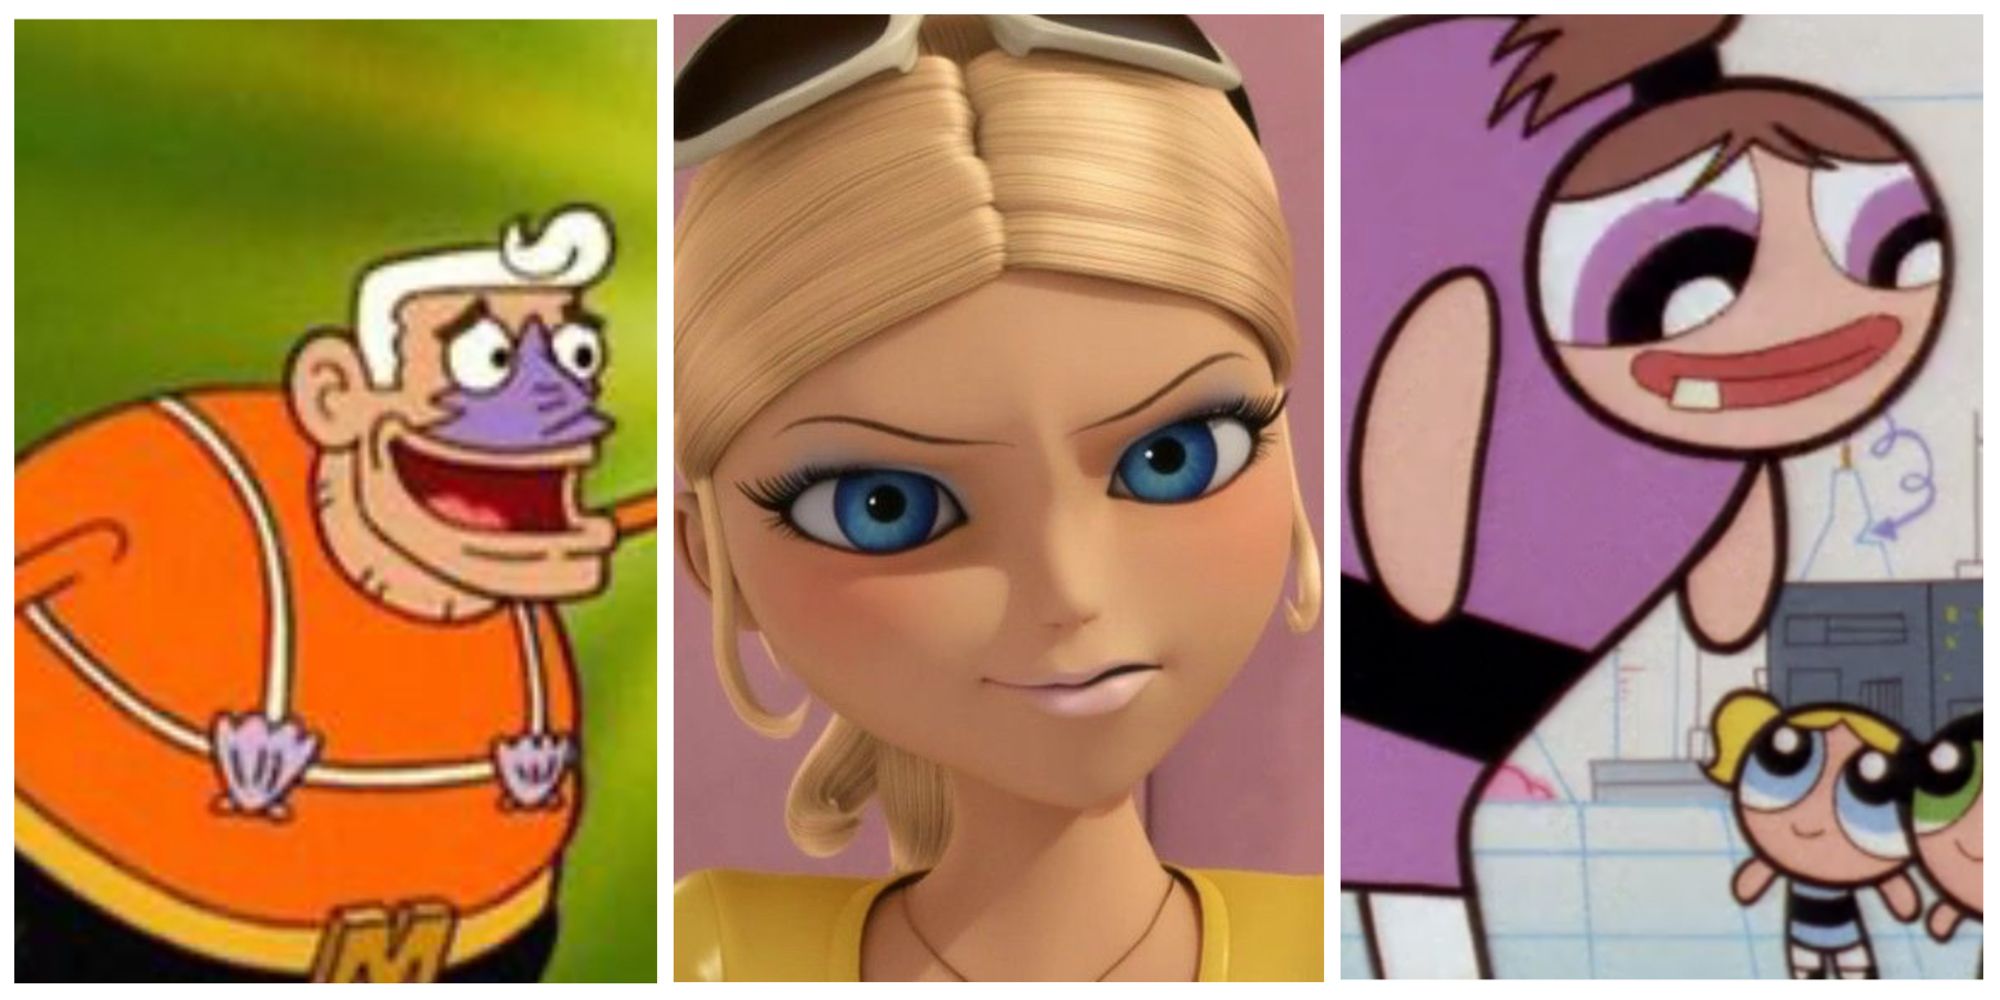 Chloe from Miraculous and Mermaid Man from Spongebob and Bunny from Powerpuff Girls 